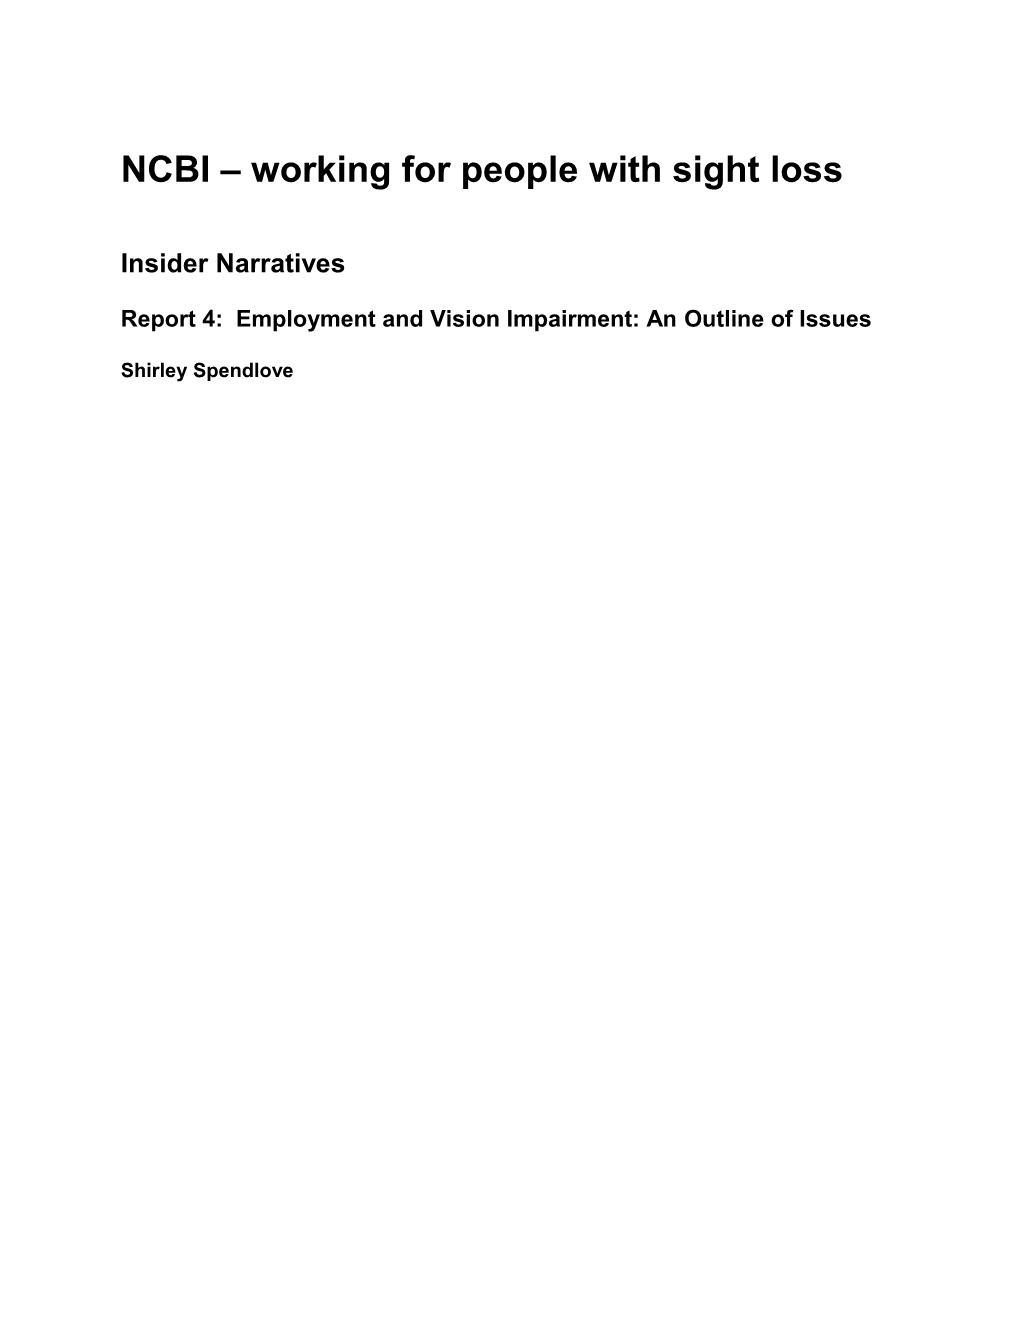 NCBI Working for People with Sight Loss